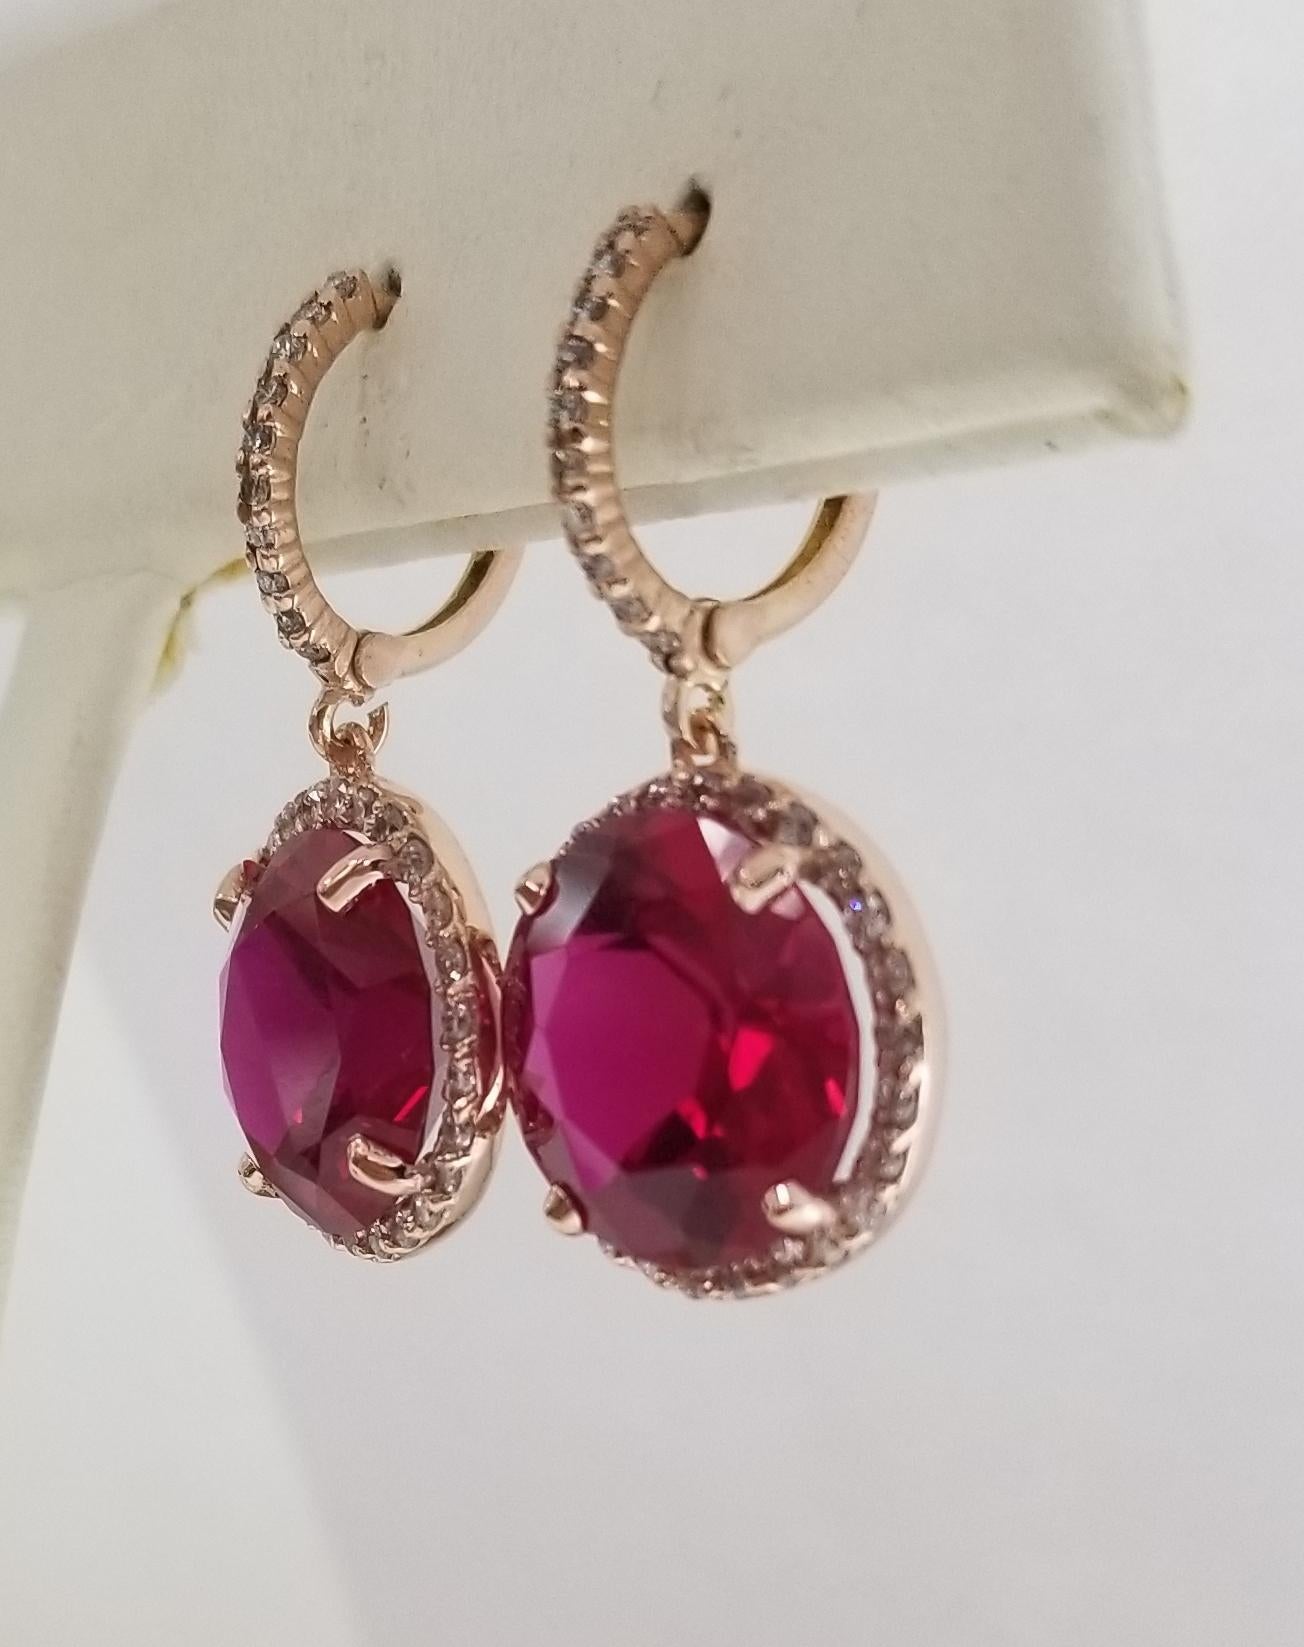 14 karat rose gold diamond hoop with synthetic ruby earrings, containing  72 round full cut diamonds weighing .65pts. surrounding 2 round synthetic rubies weighing 14.05cts. 